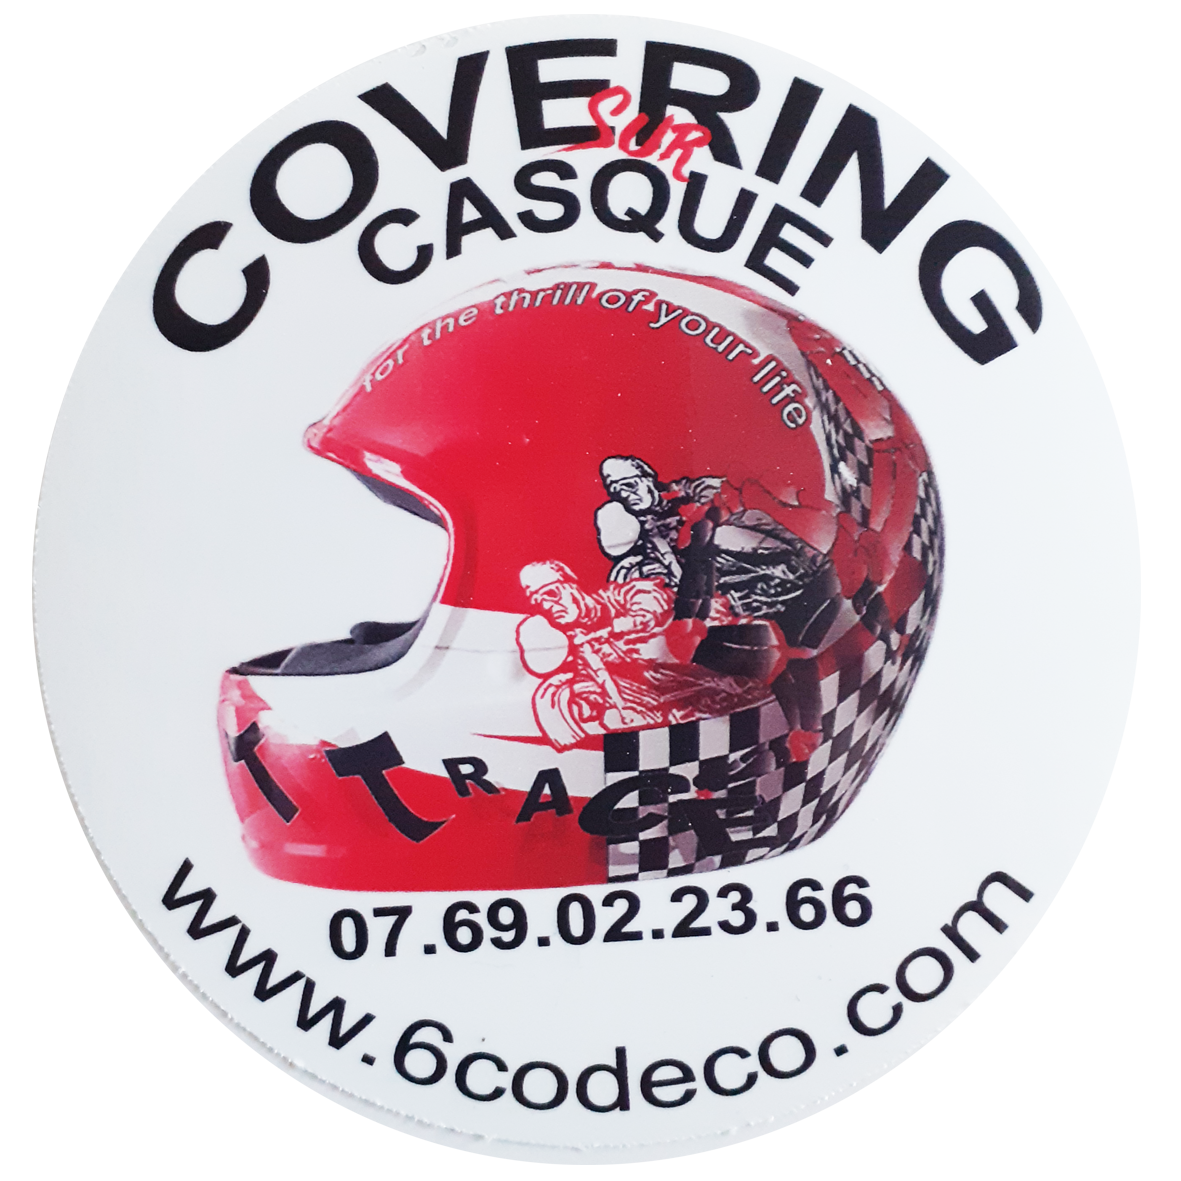 TOTAL COVERING CASQUE